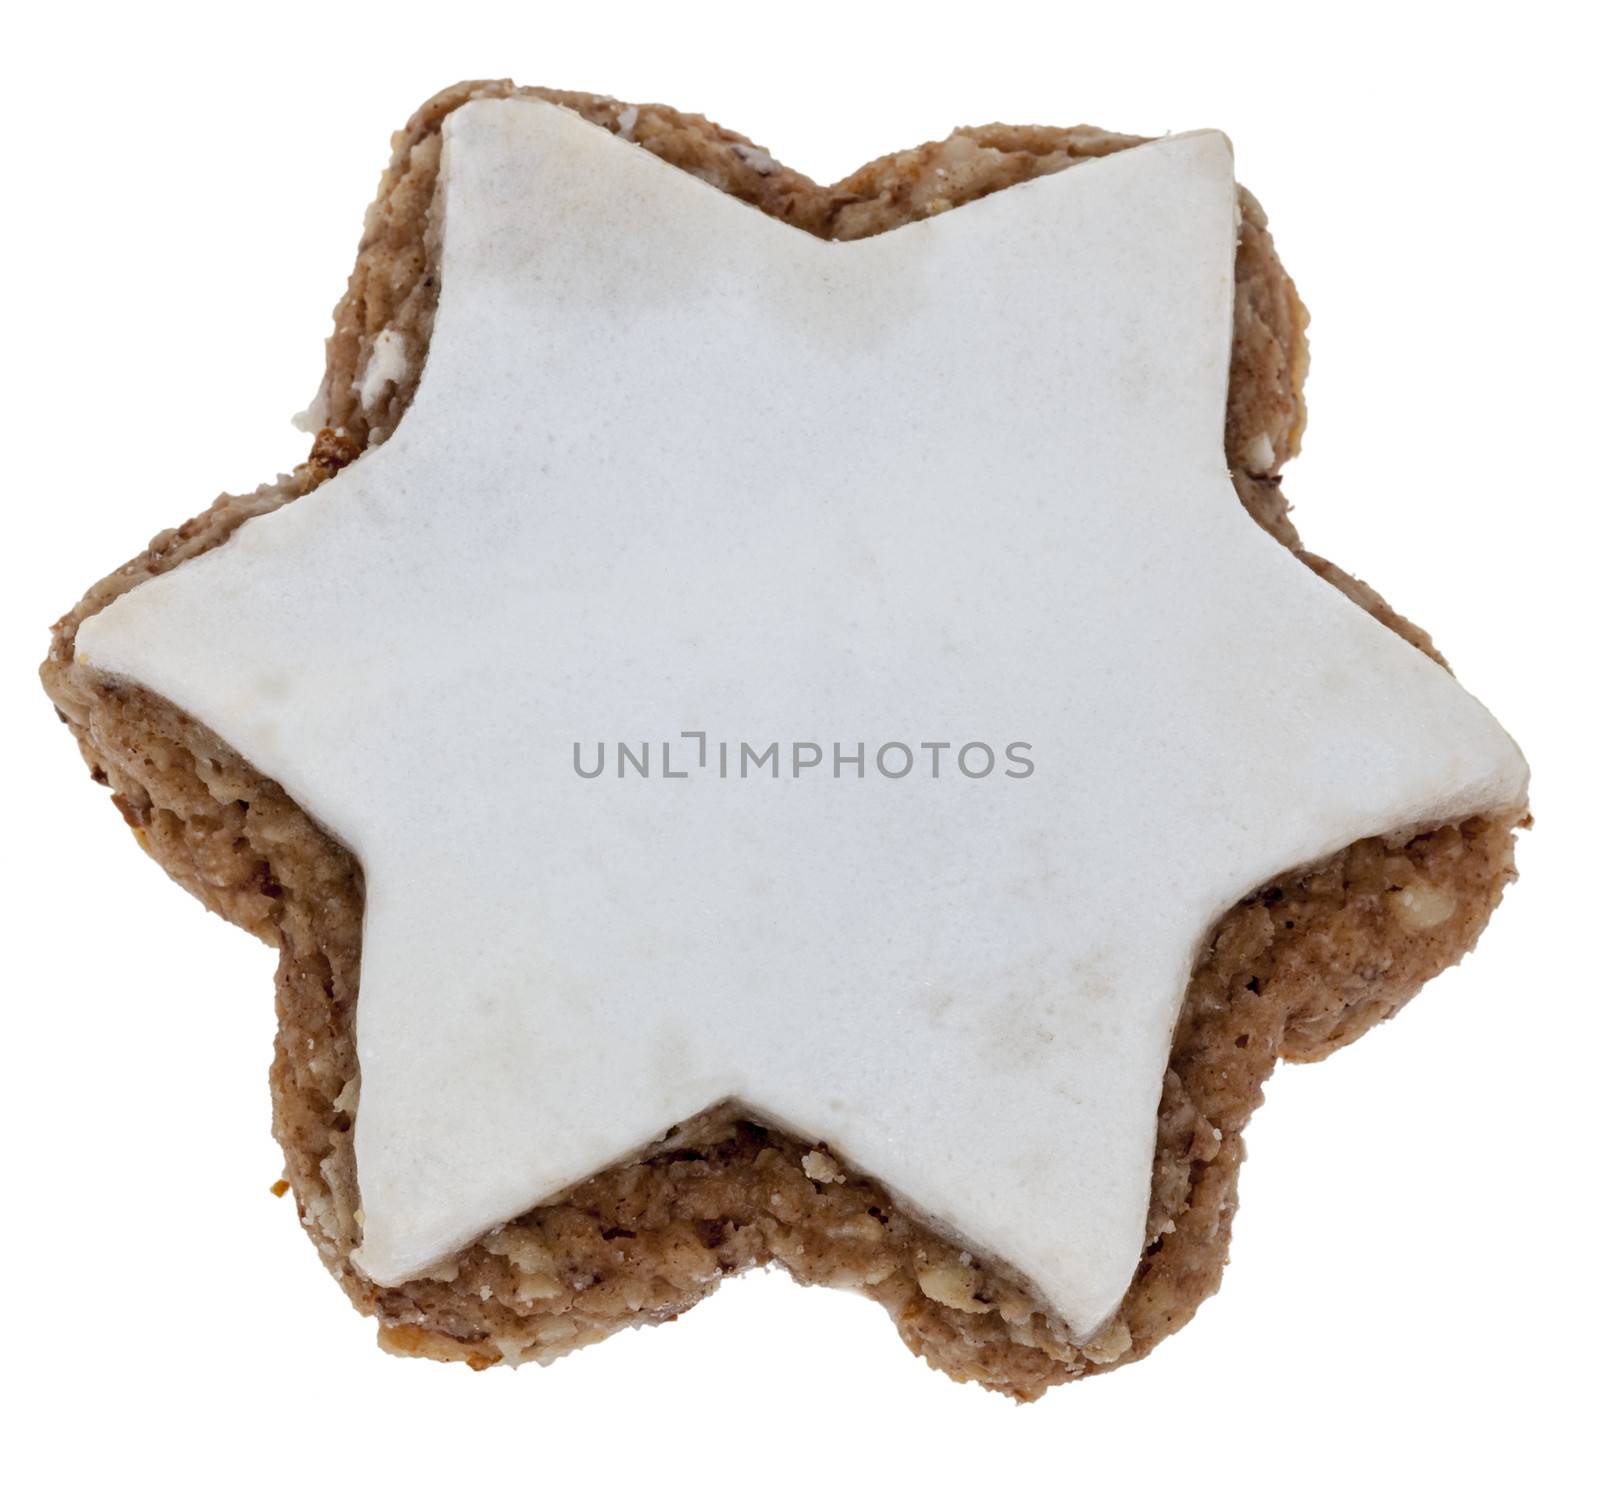 Traditional winter star-shaped cookie with white frosting, isolated against a white background.